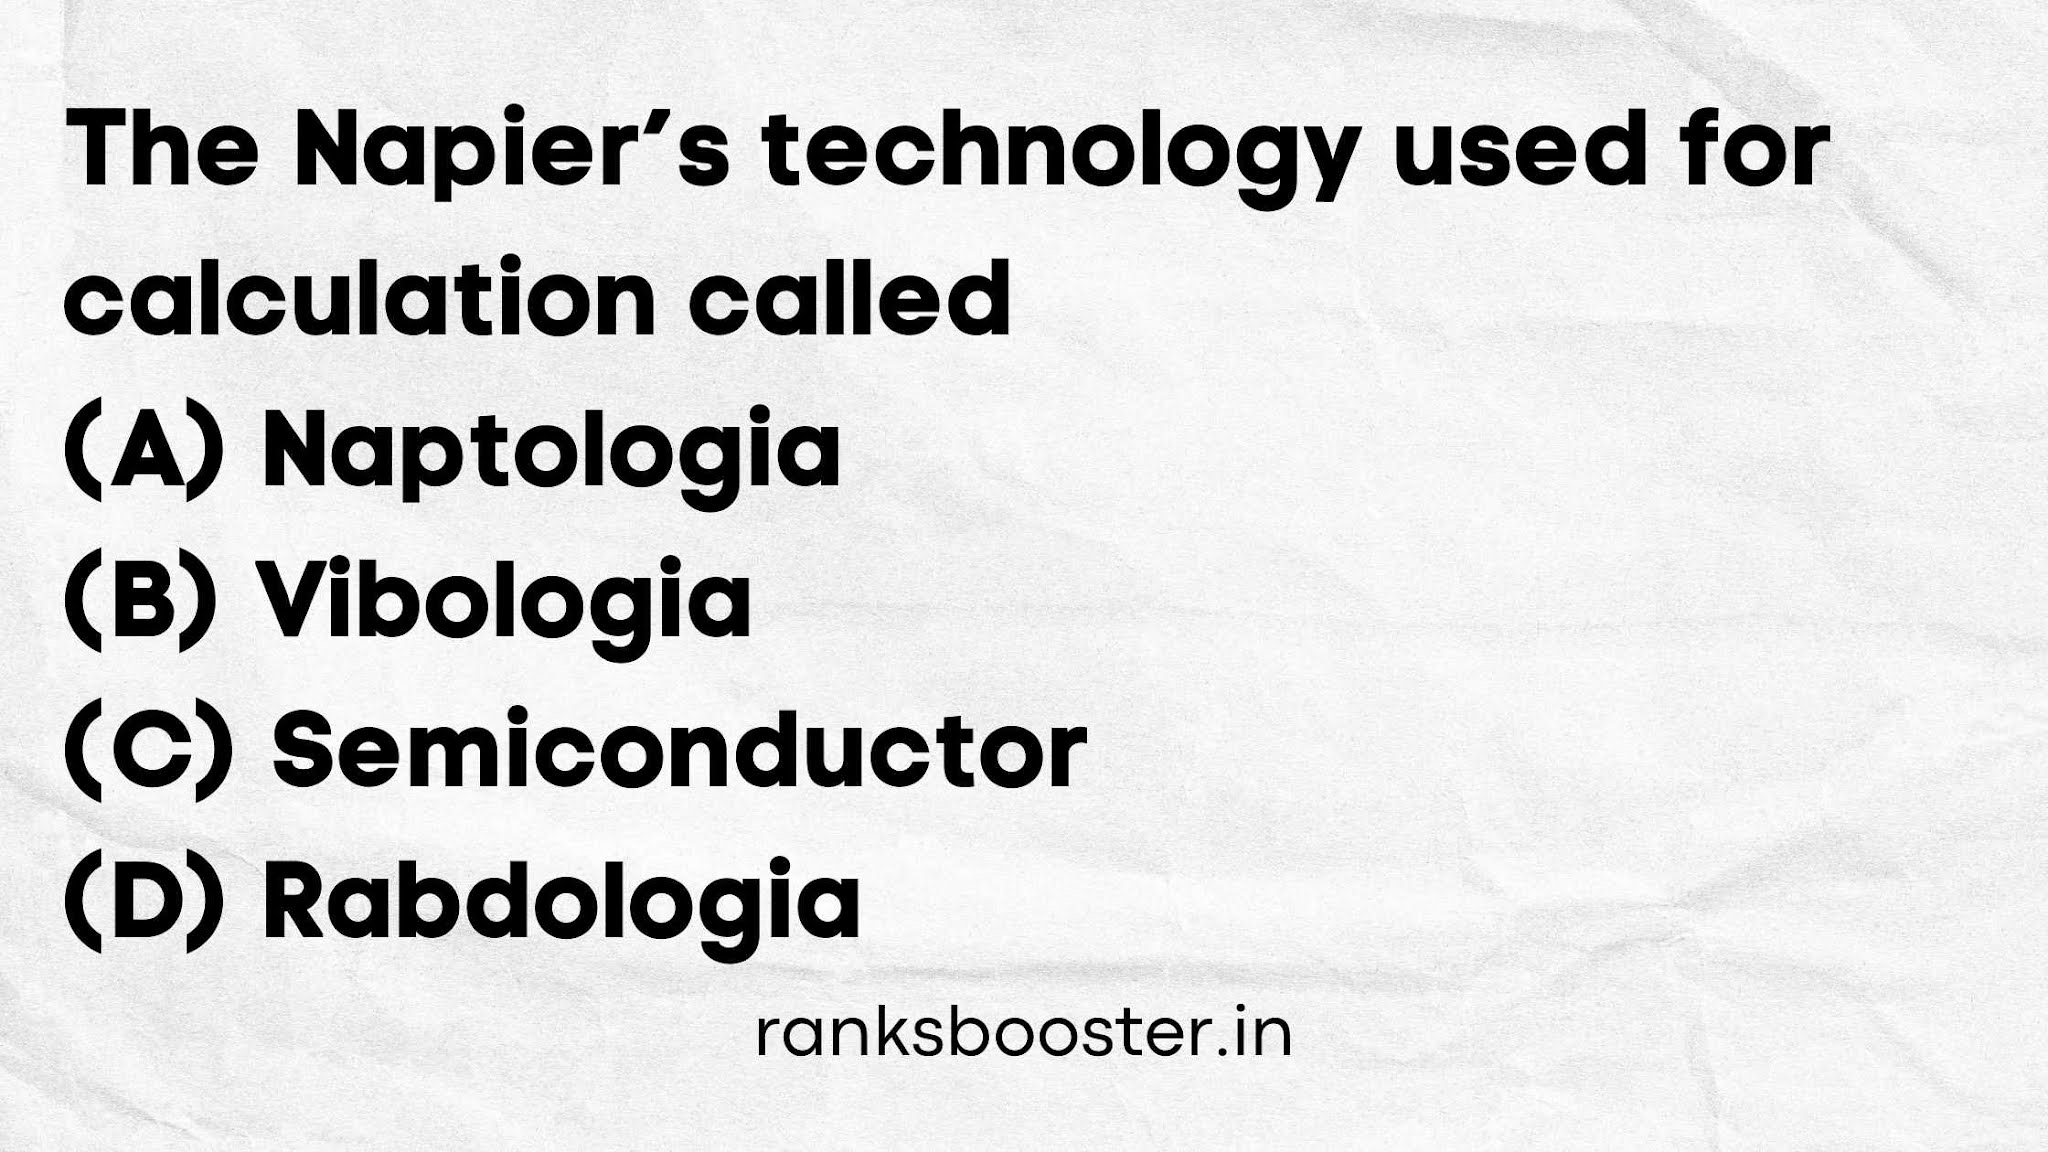 The Napier’s technology used for calculation called (A) Naptologia (B) Vibologia (C) Semiconductor (D) Rabdologia